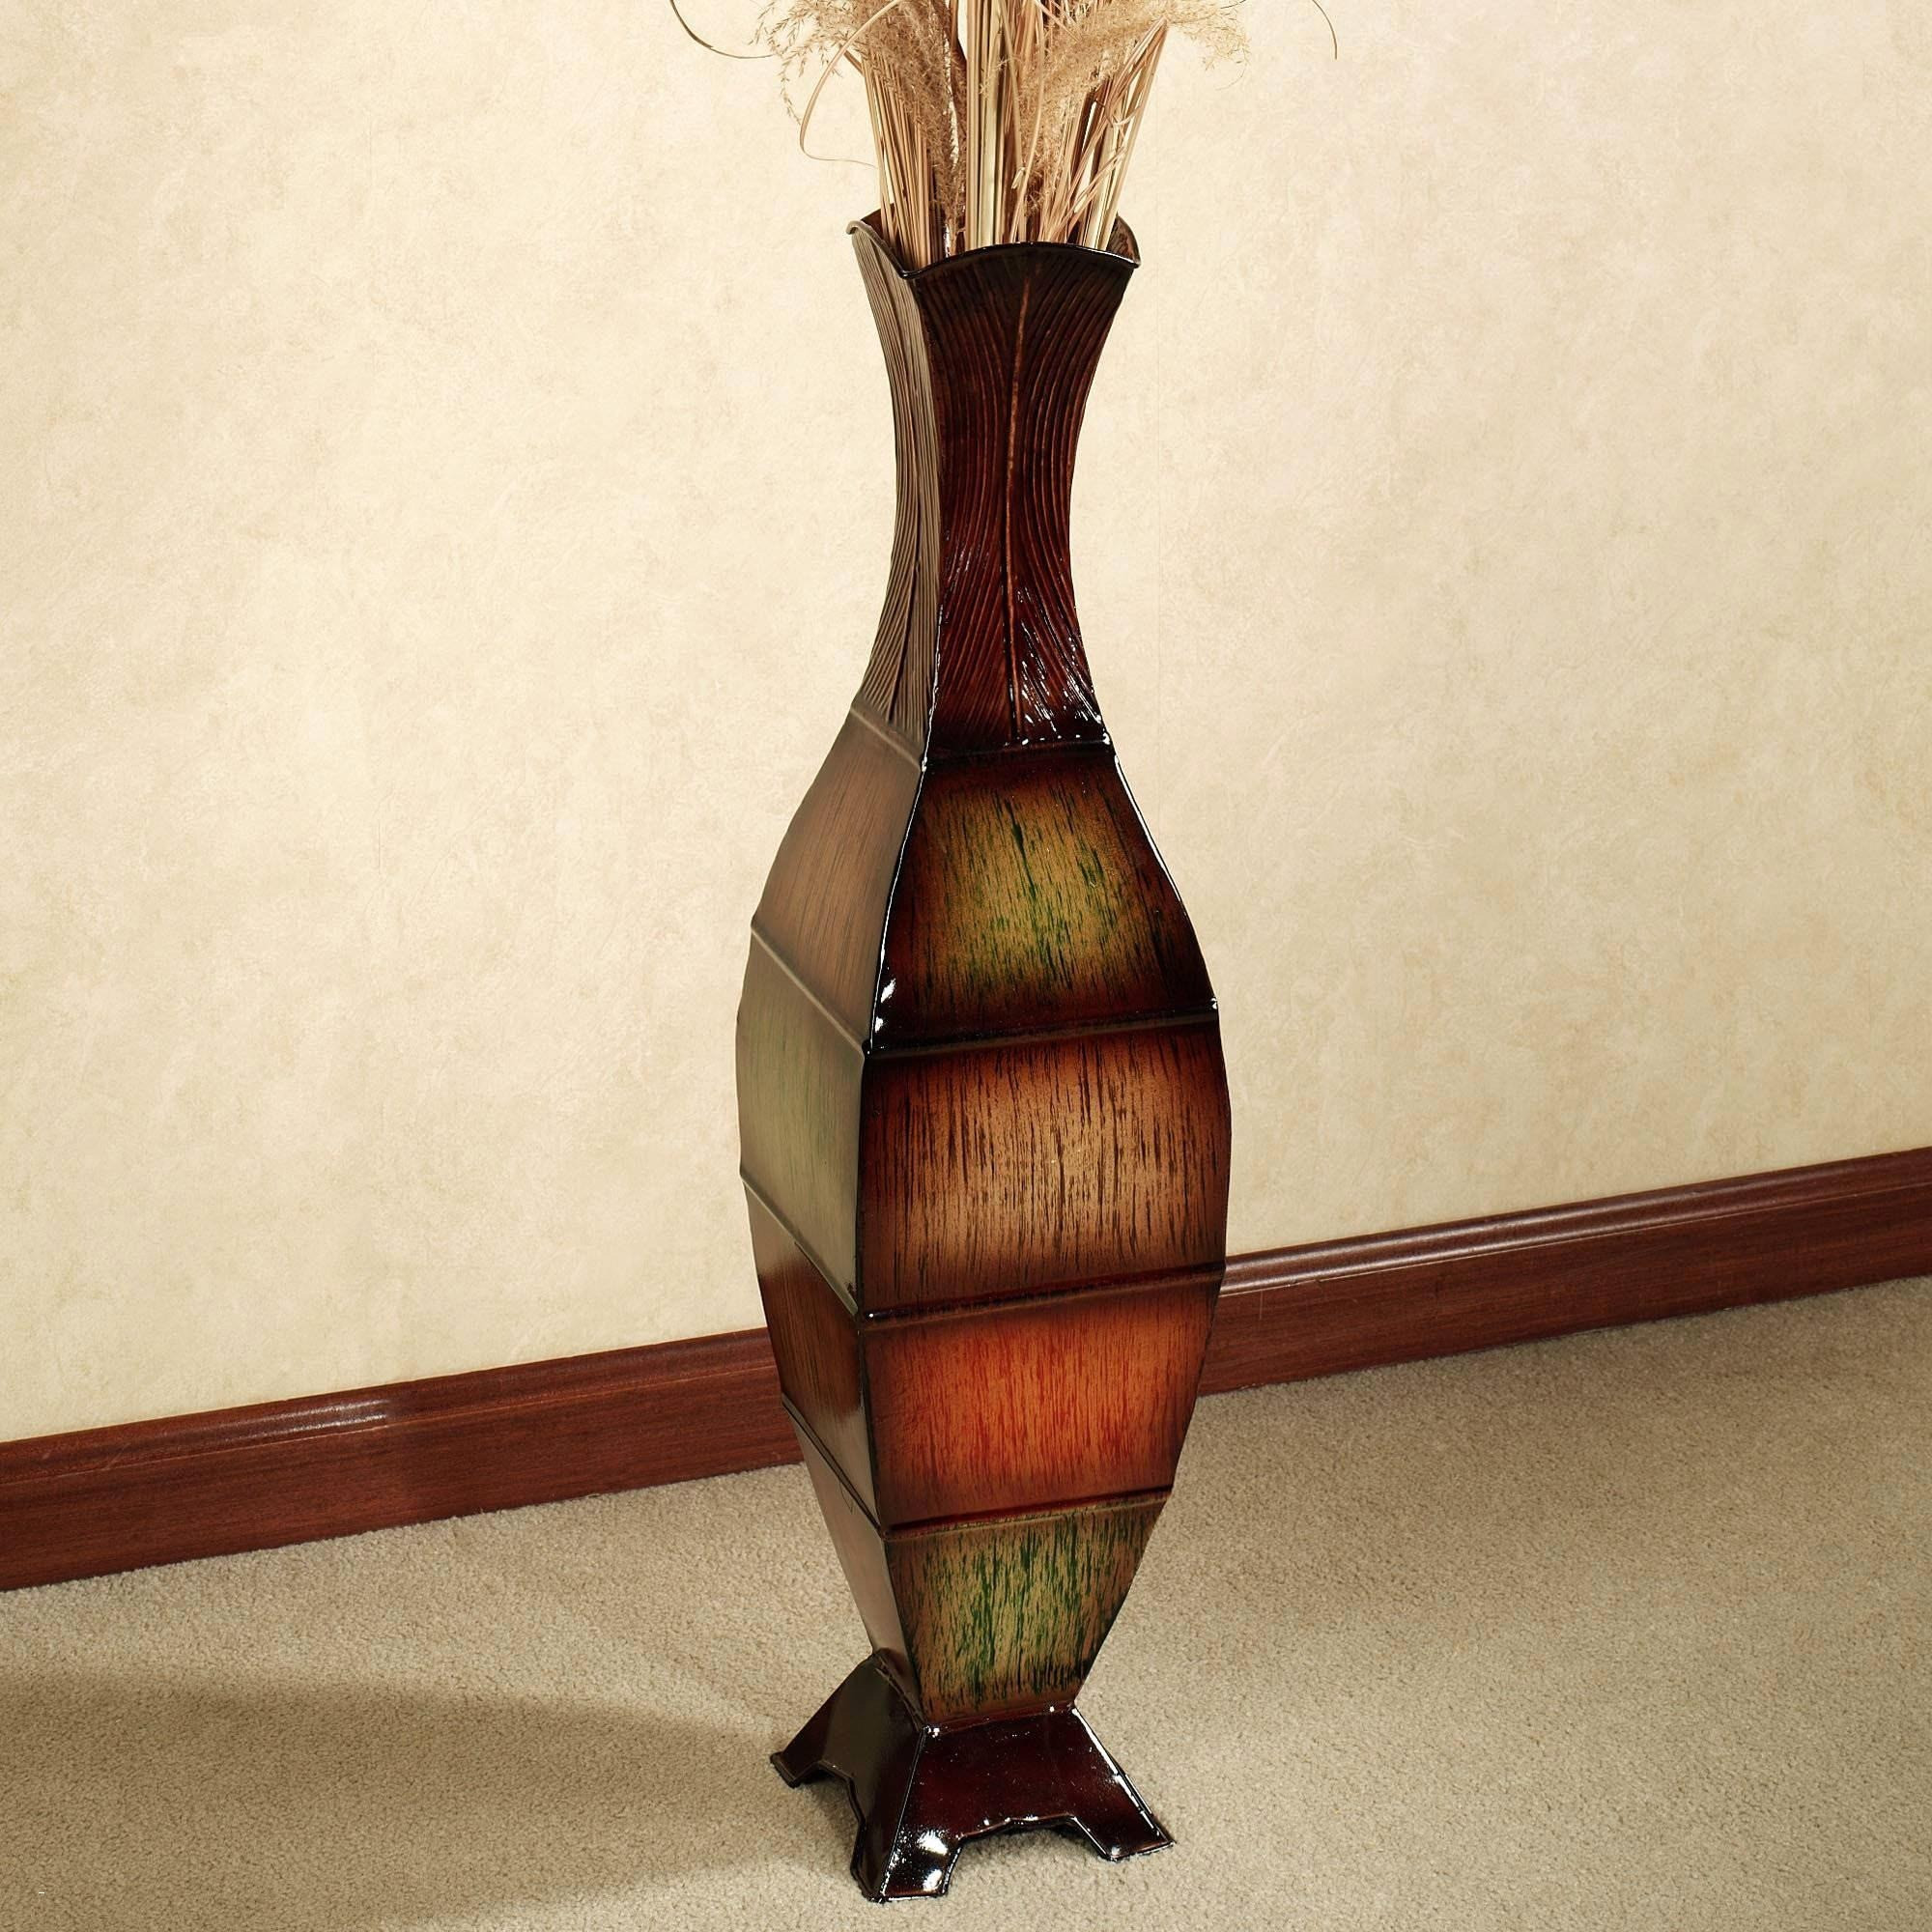 26 Nice Cheap Floral Vases wholesale 2024 free download cheap floral vases wholesale of big lamps best of current home colors in consort with living room within big lamps inspirational living room vases wholesale new h vases big tall i 0d for che